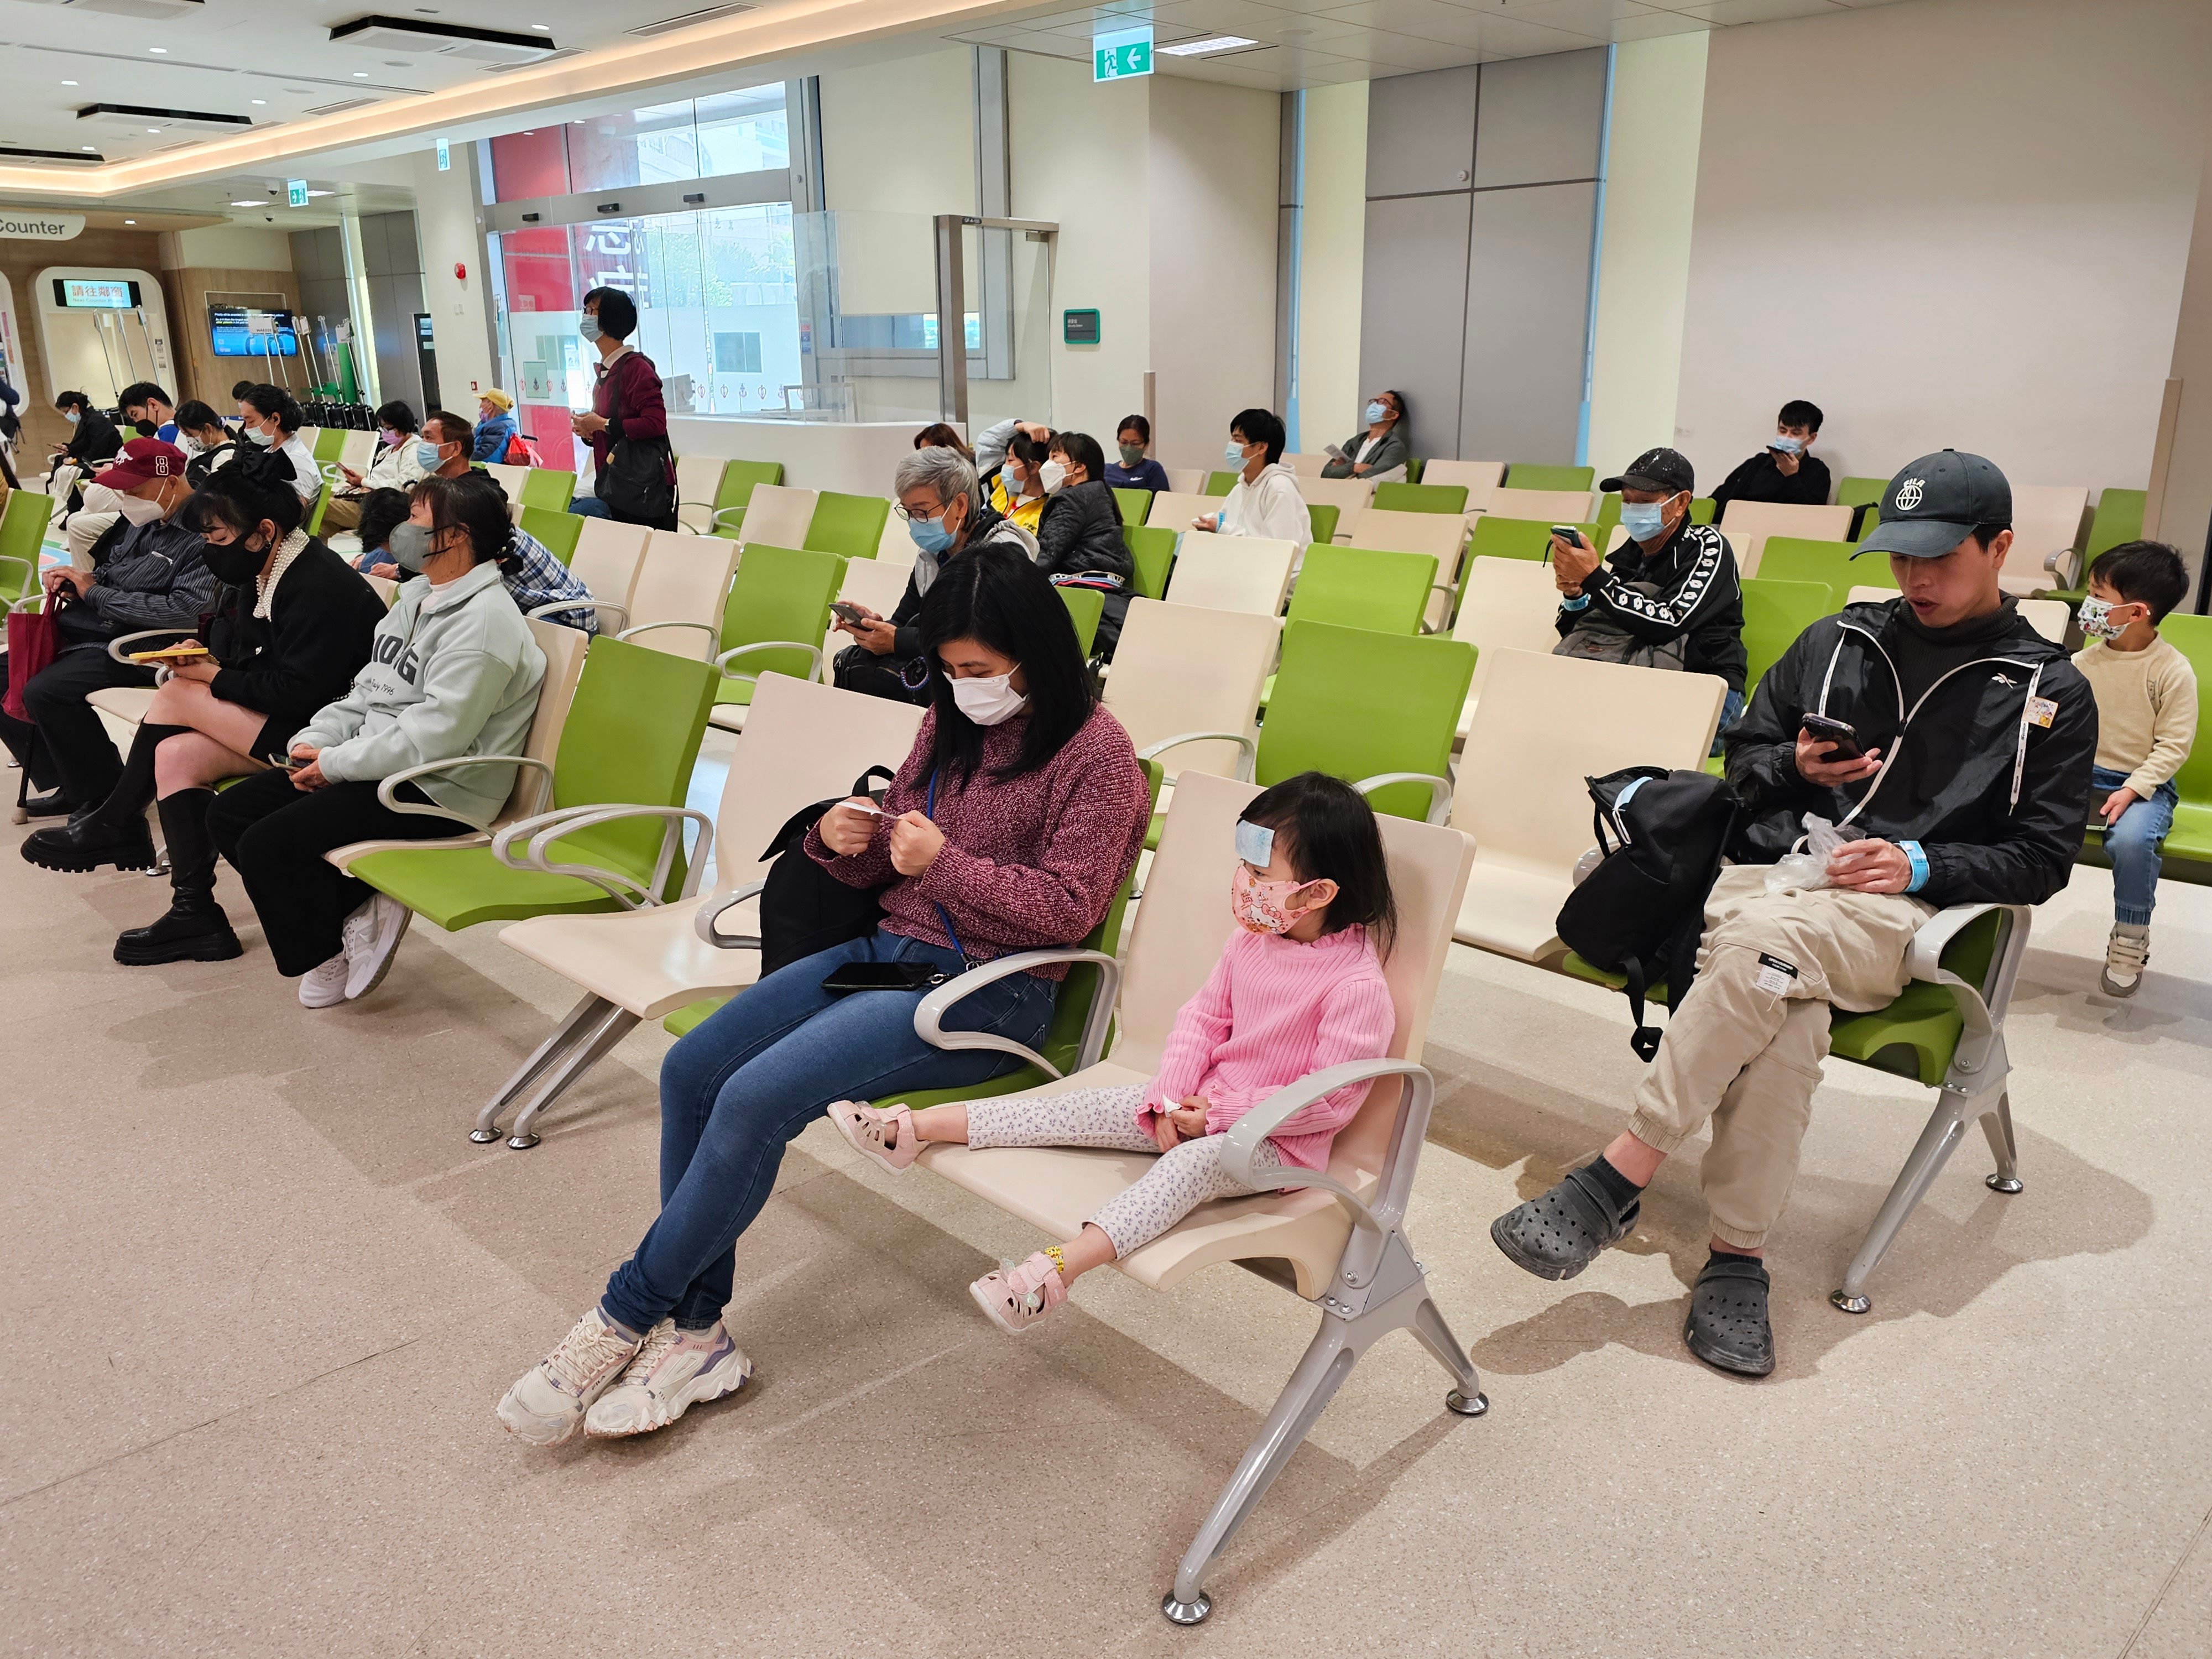 People wait in the A&E department at Kwong Wah Hospital in Mong Kok, on January 6. Photo: Edmond So